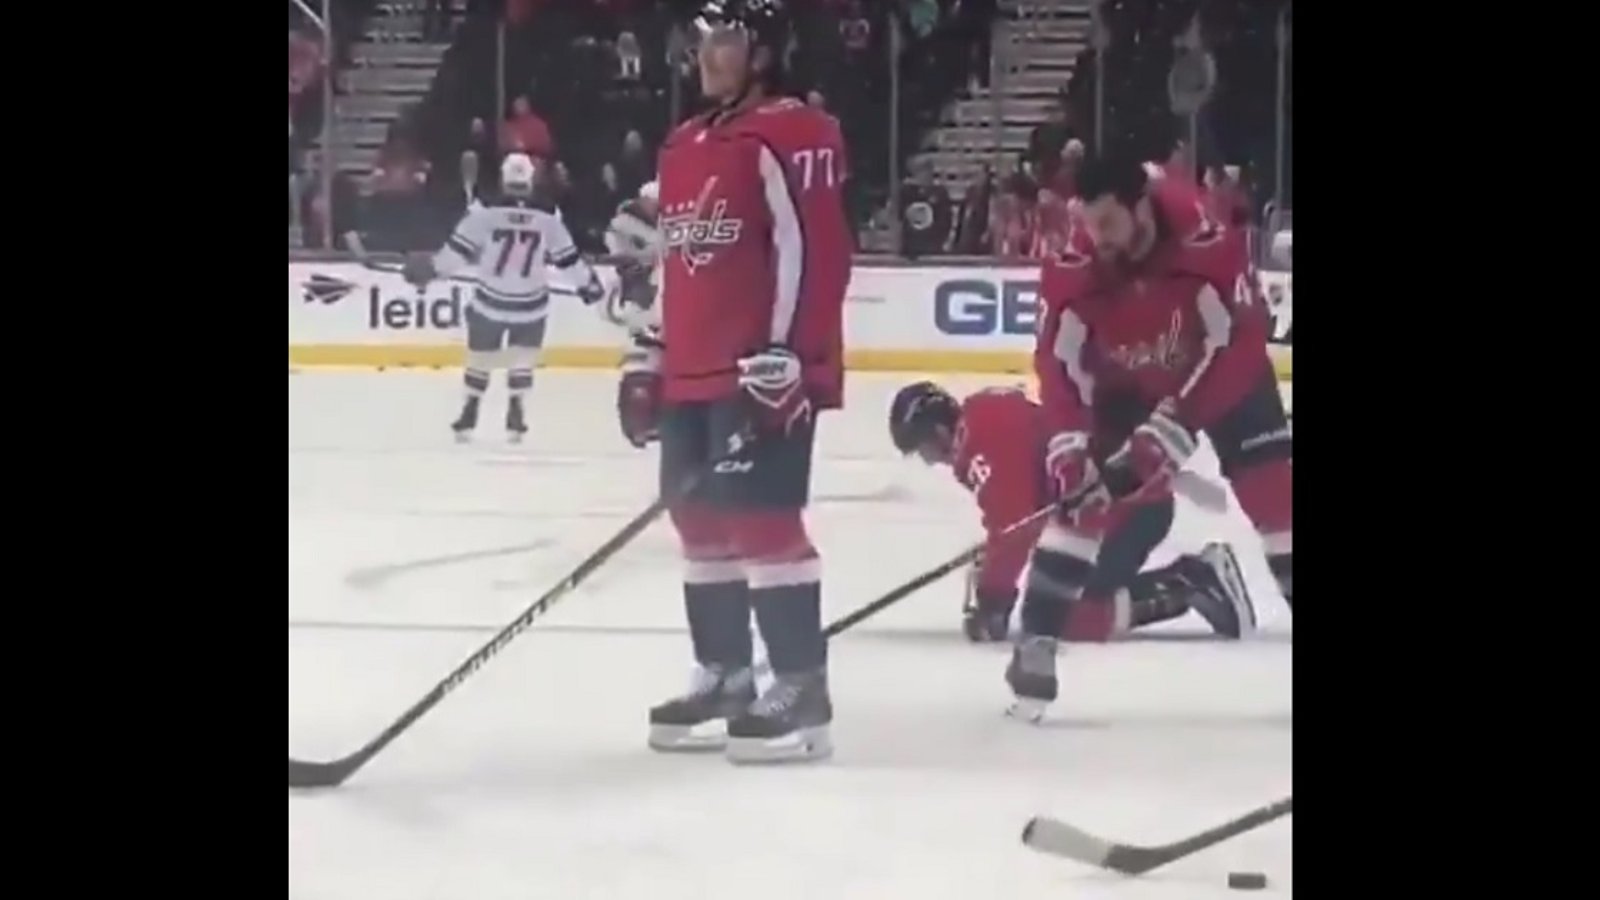 Tom Wilson gives TJ Oshie a low blow before the start of the game.